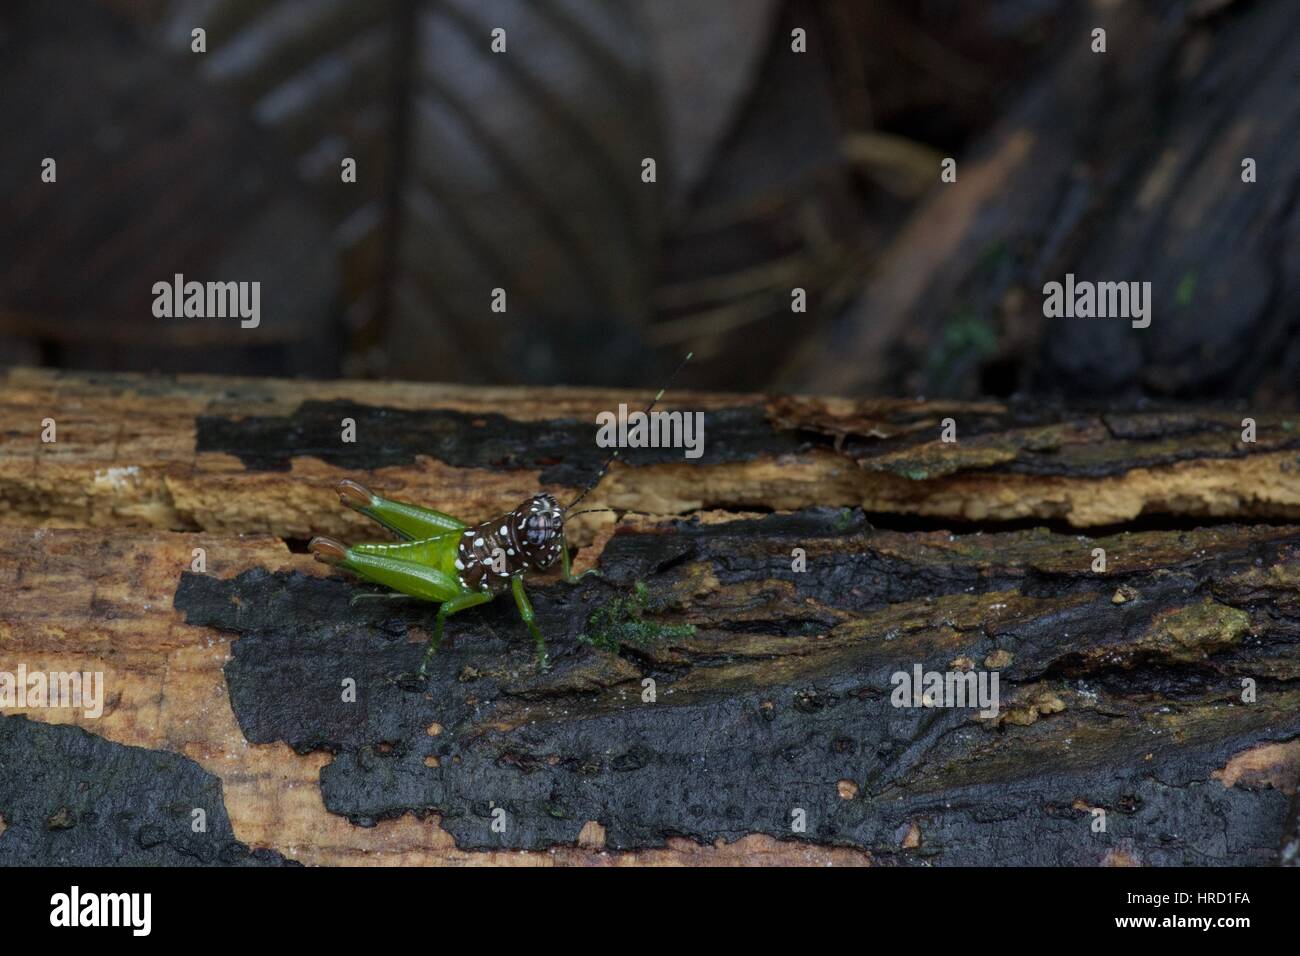 A colorful short-horned grasshopper nymph (family Acrididae) on a log in the Amazon rainforest in Loreto, Peru Stock Photo